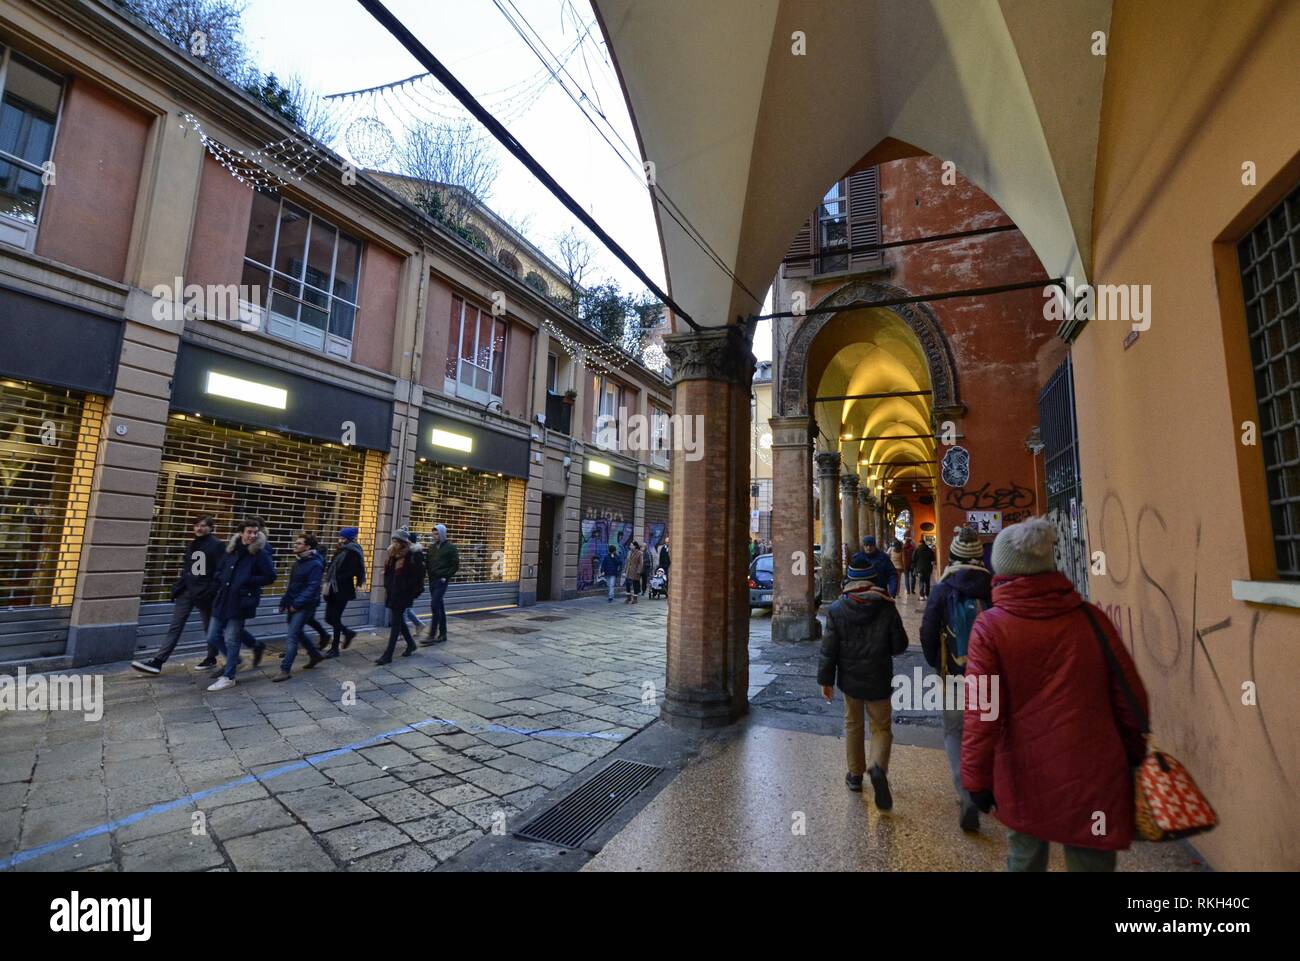 Bologna, Emilia Romagna, Italy. December 2018. The long porticos characterize the city, the Christmas atmosphere attracts people who strolls visiting  Stock Photo